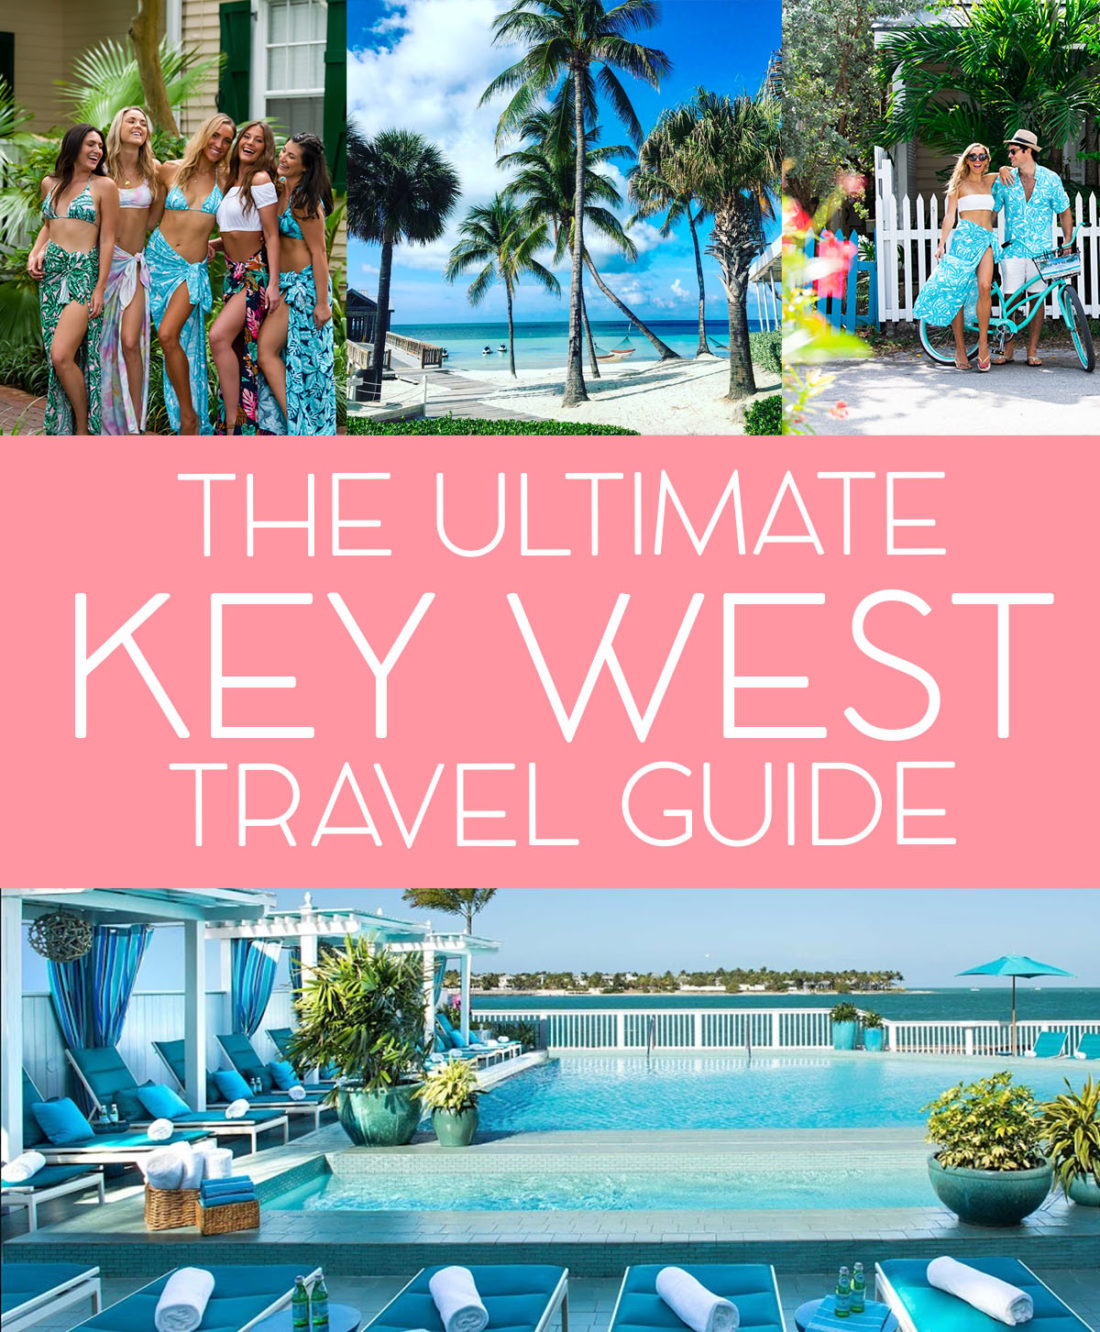 The Ultimate Key West Travel Guide: Where to Eat, Drink, Stay and Play in Key  West, Florida - JetsetChristina